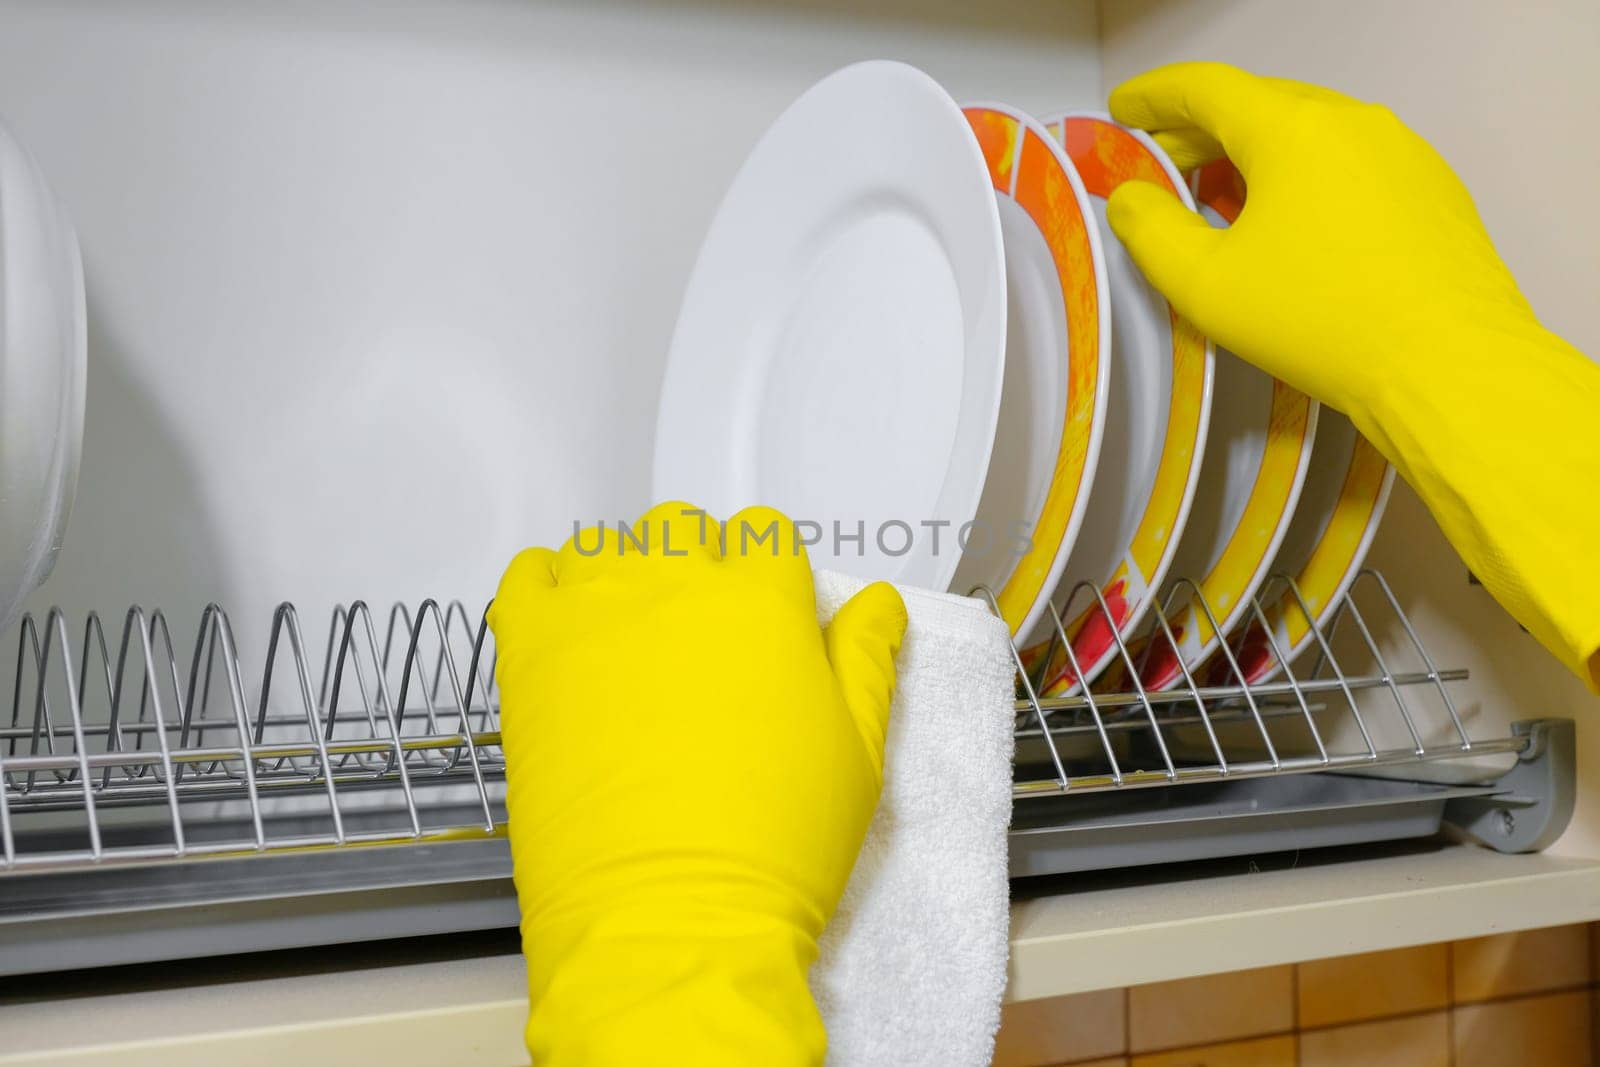 Hands in rubber gloves wipe dishes in the kitchen. House cleaning.